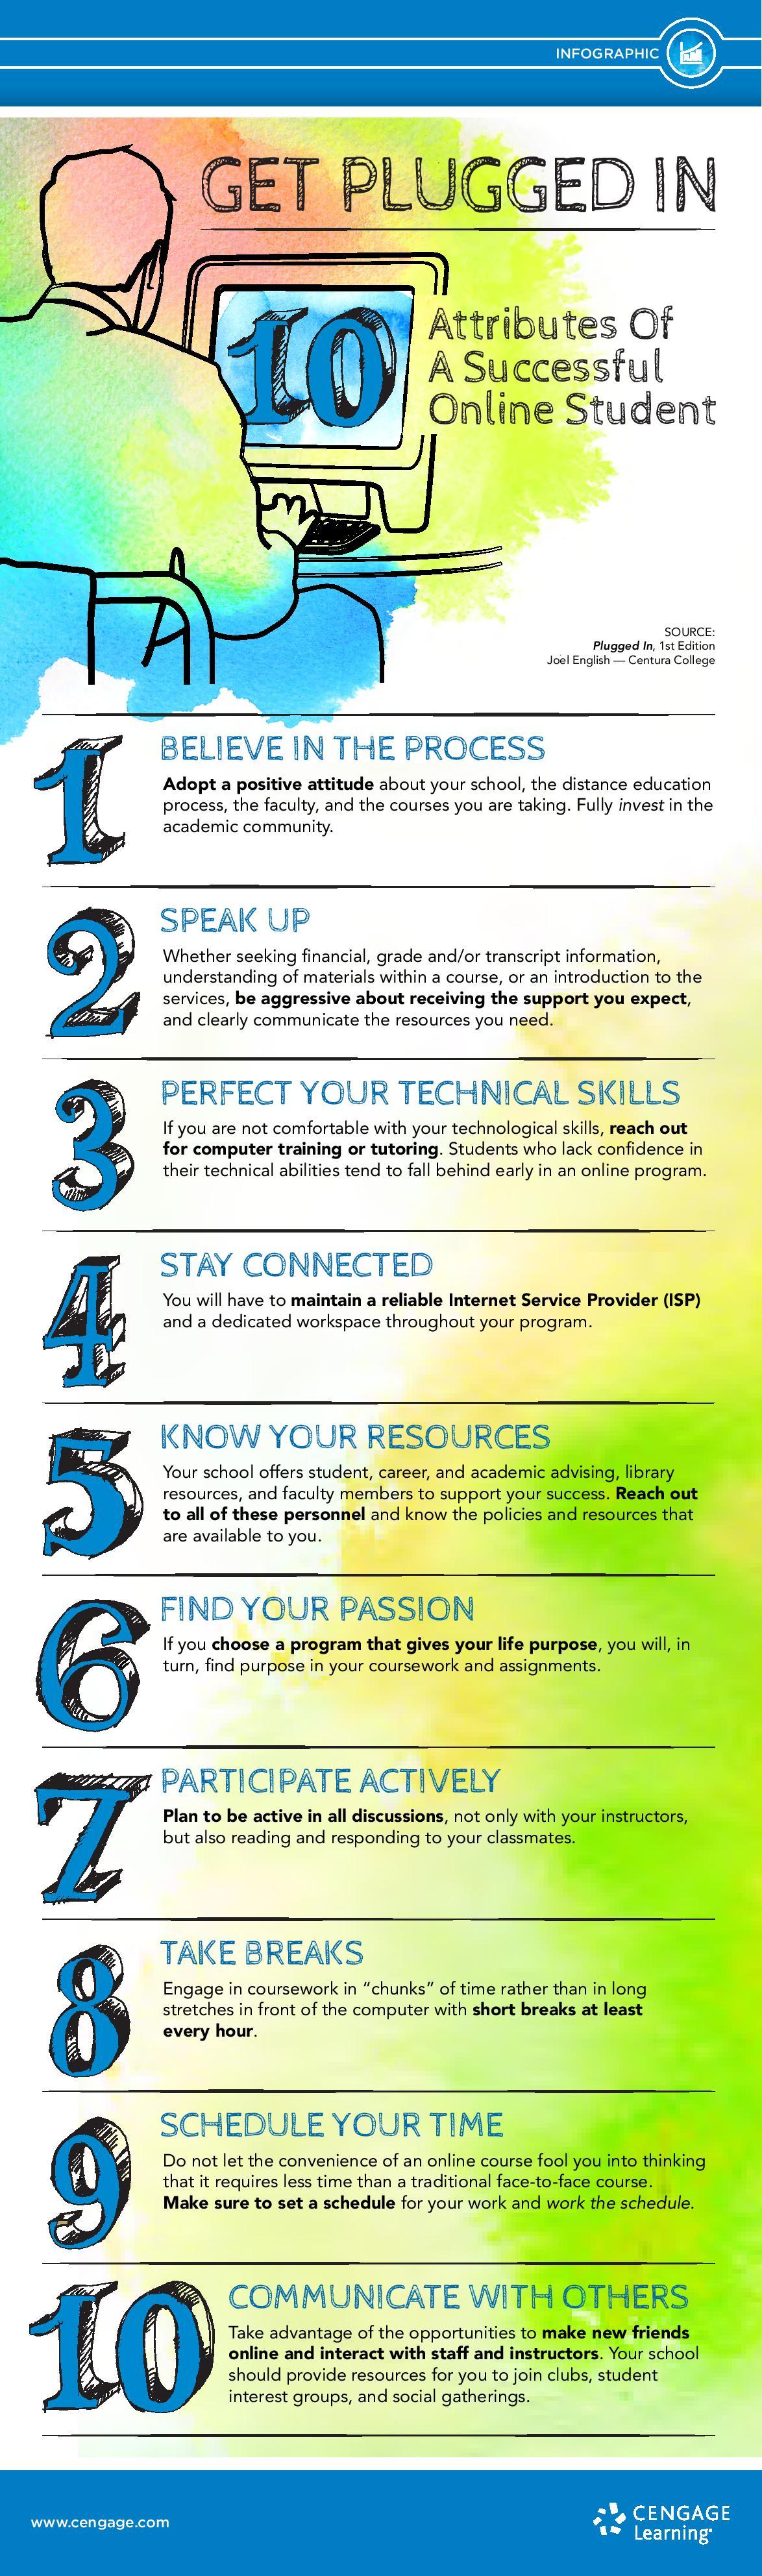 10 Attributes of a Successful Online Student Infographic